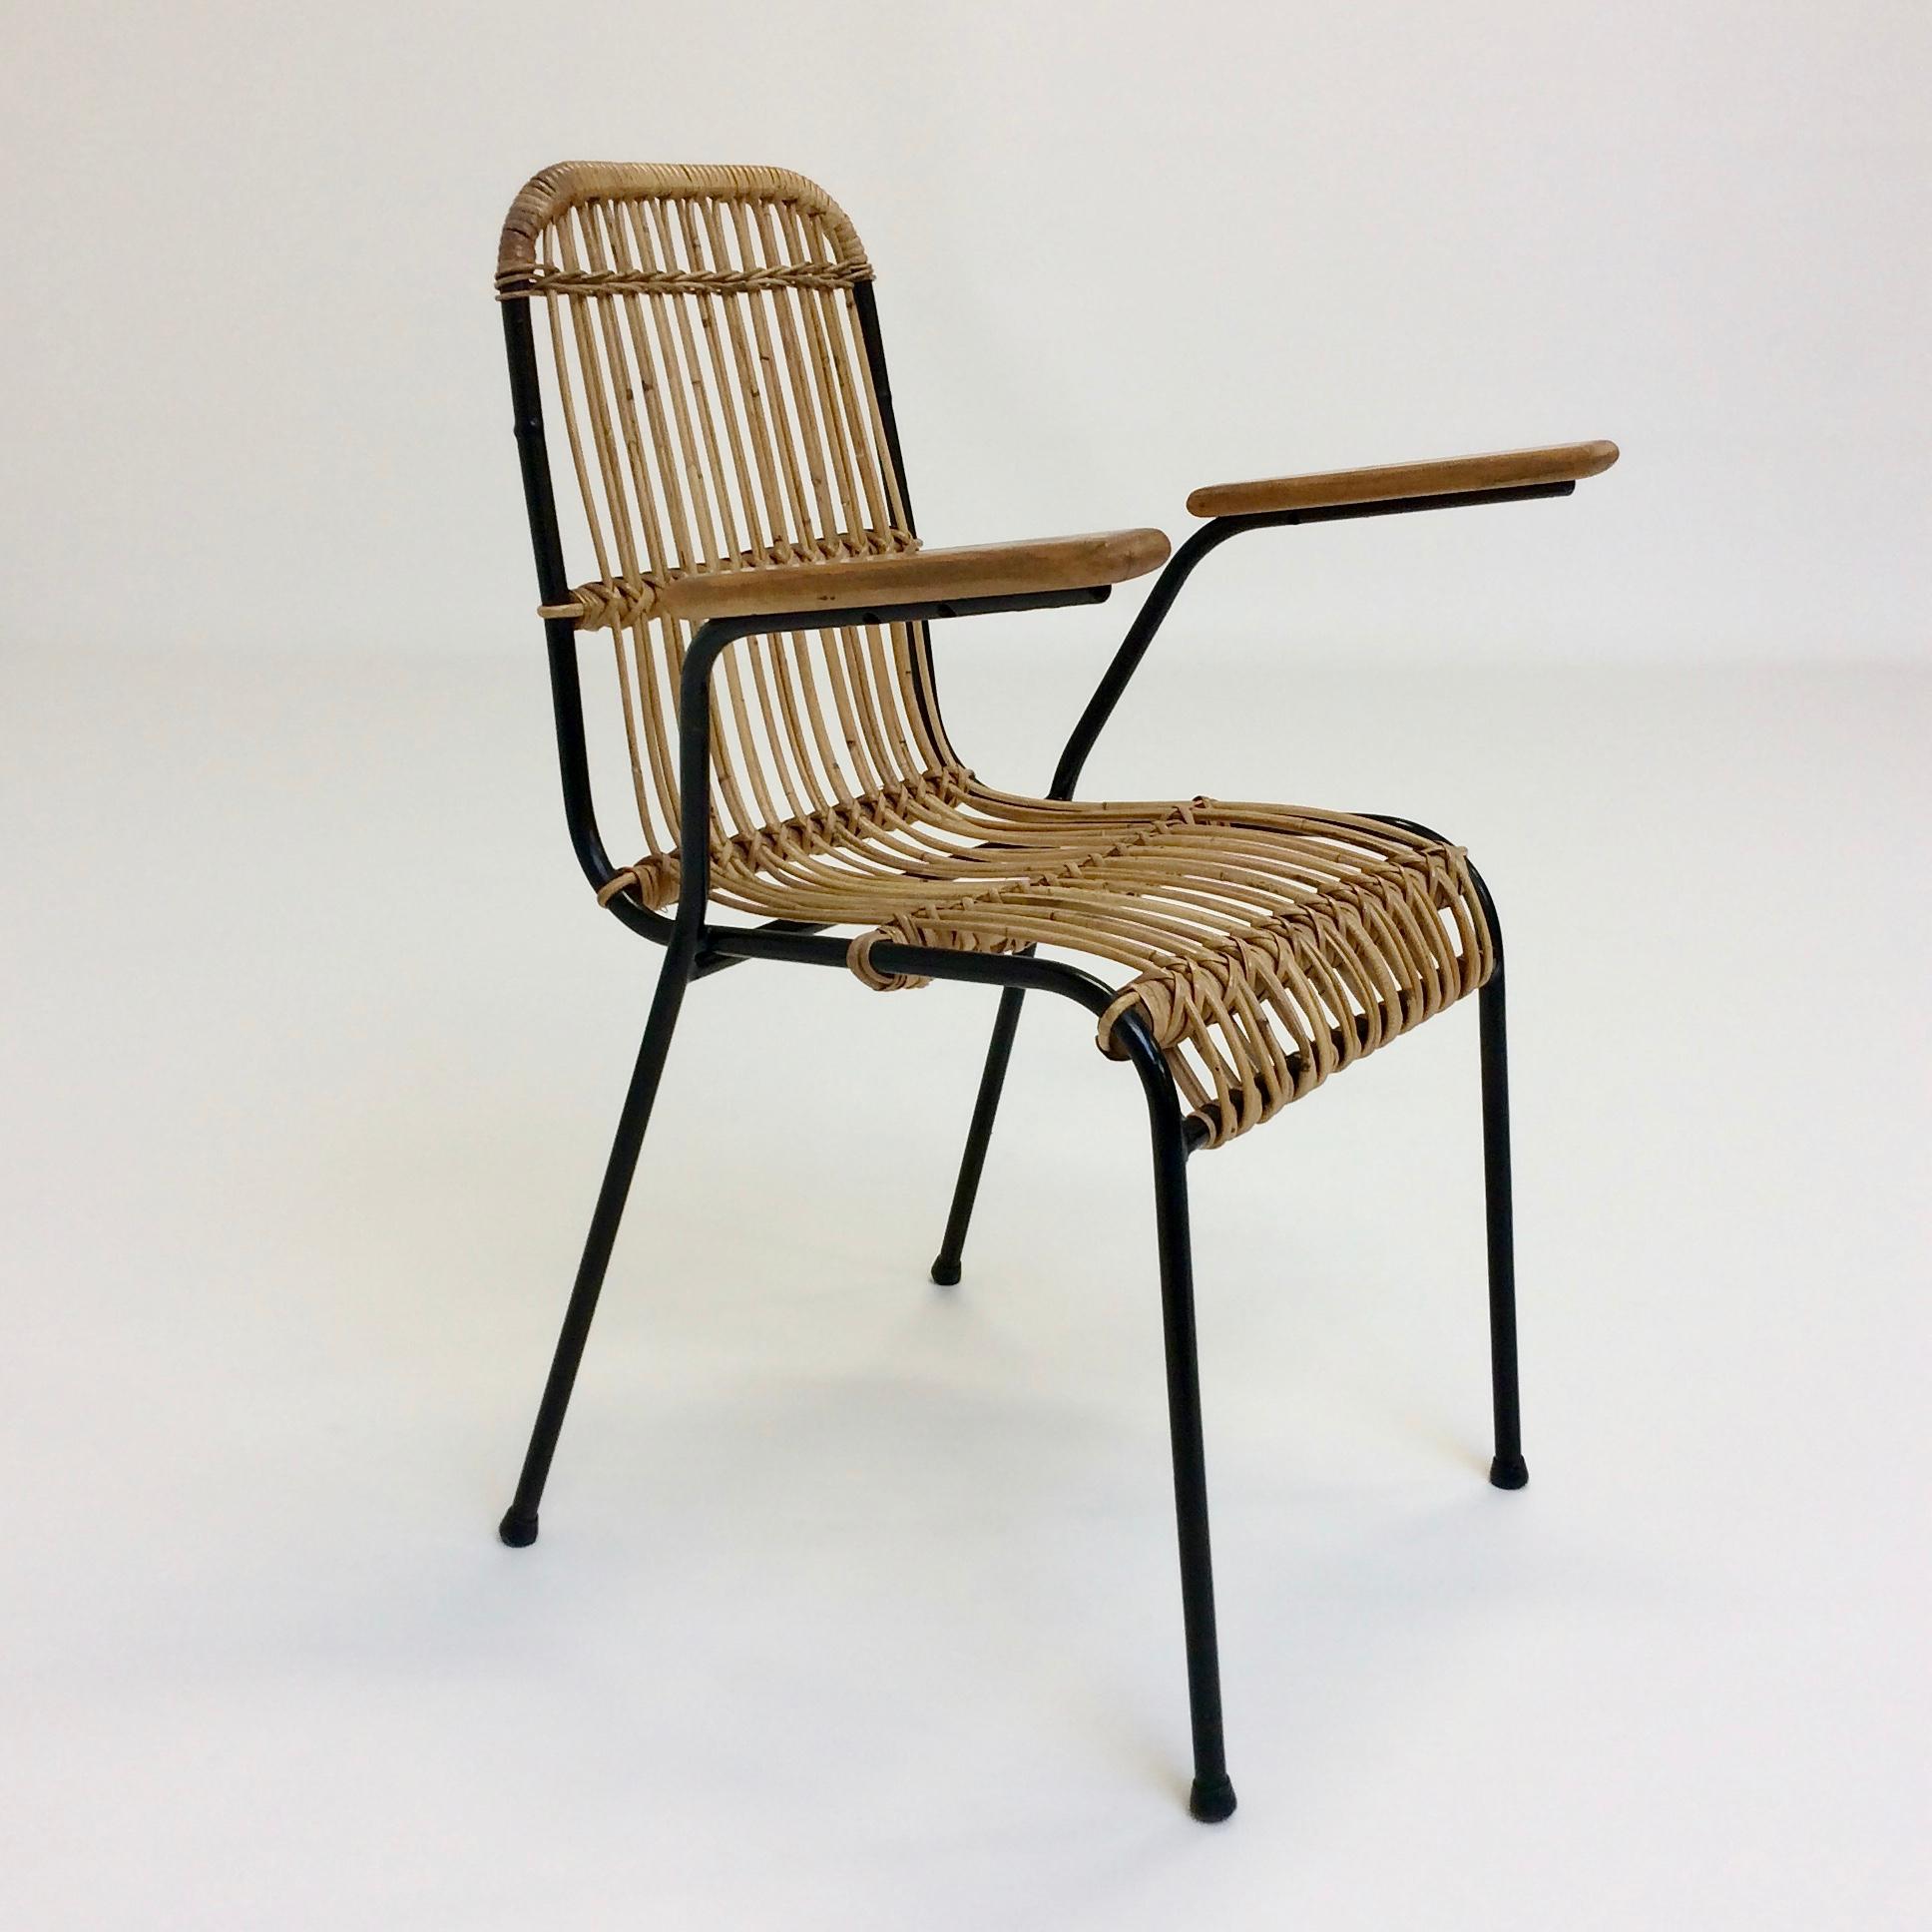 Nice set of 4 armchairs, circa 1950, France.
Rattan and wicker, black tubular metal, light wood armrests.
Dimensions: 85 cm H, 61 cm W, 46 cm D, seat height 46.
Good condition.
All purchases are covered by our Buyer Protection Guarantee.
This item